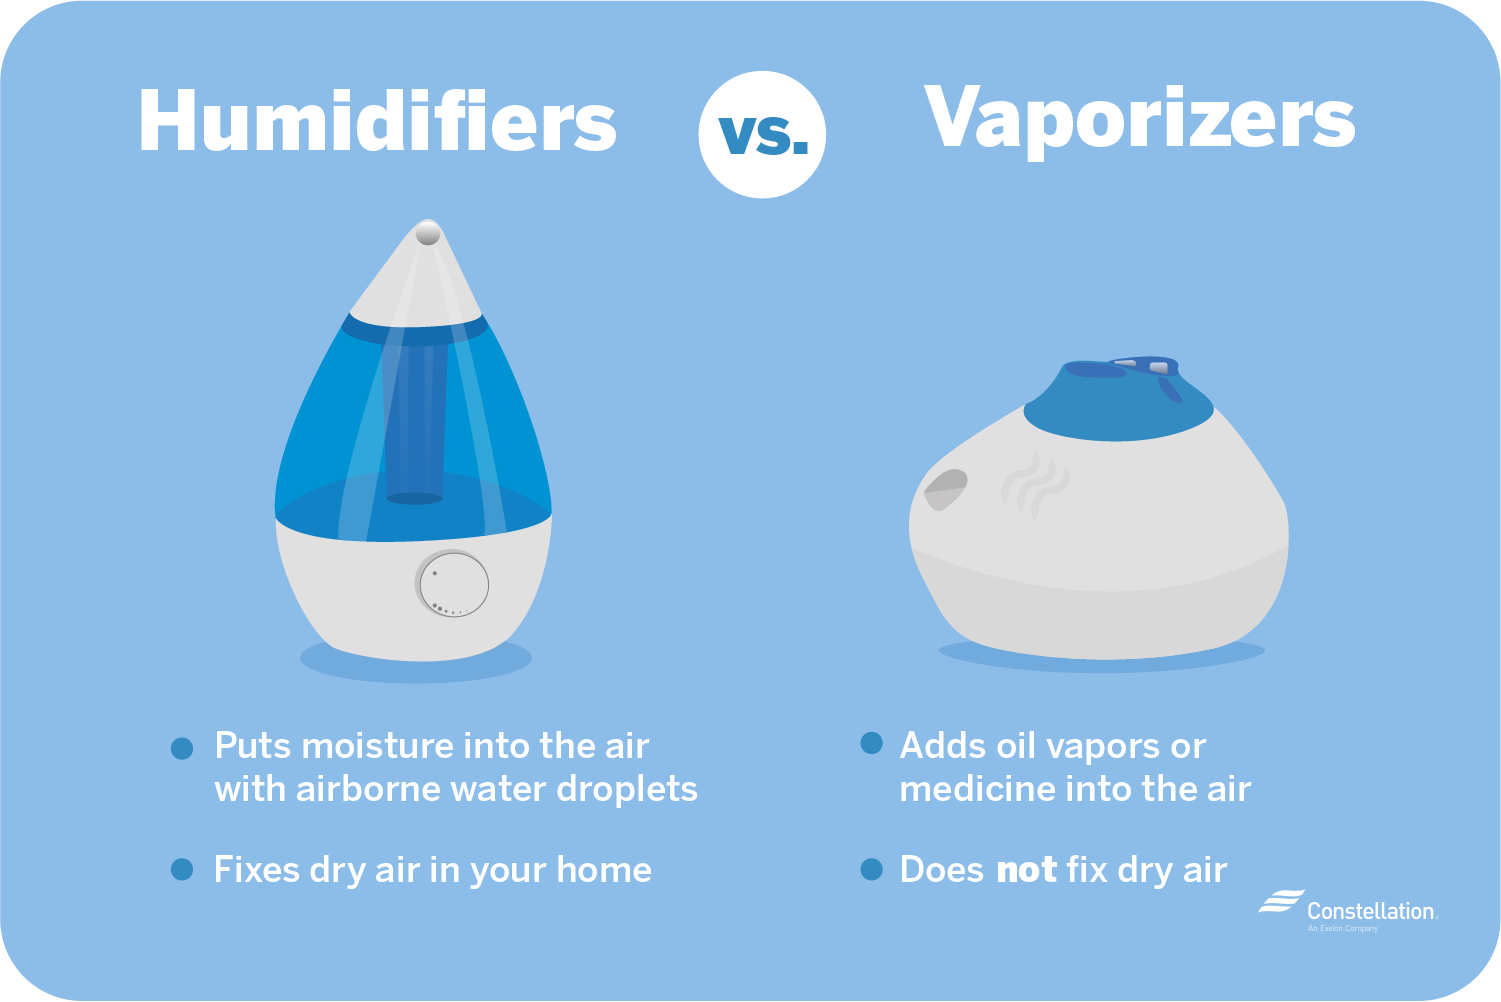 Energy-efficient humidifiers put moisture into the air to fix dry air while vaporizers defuse oils or medicines into the air